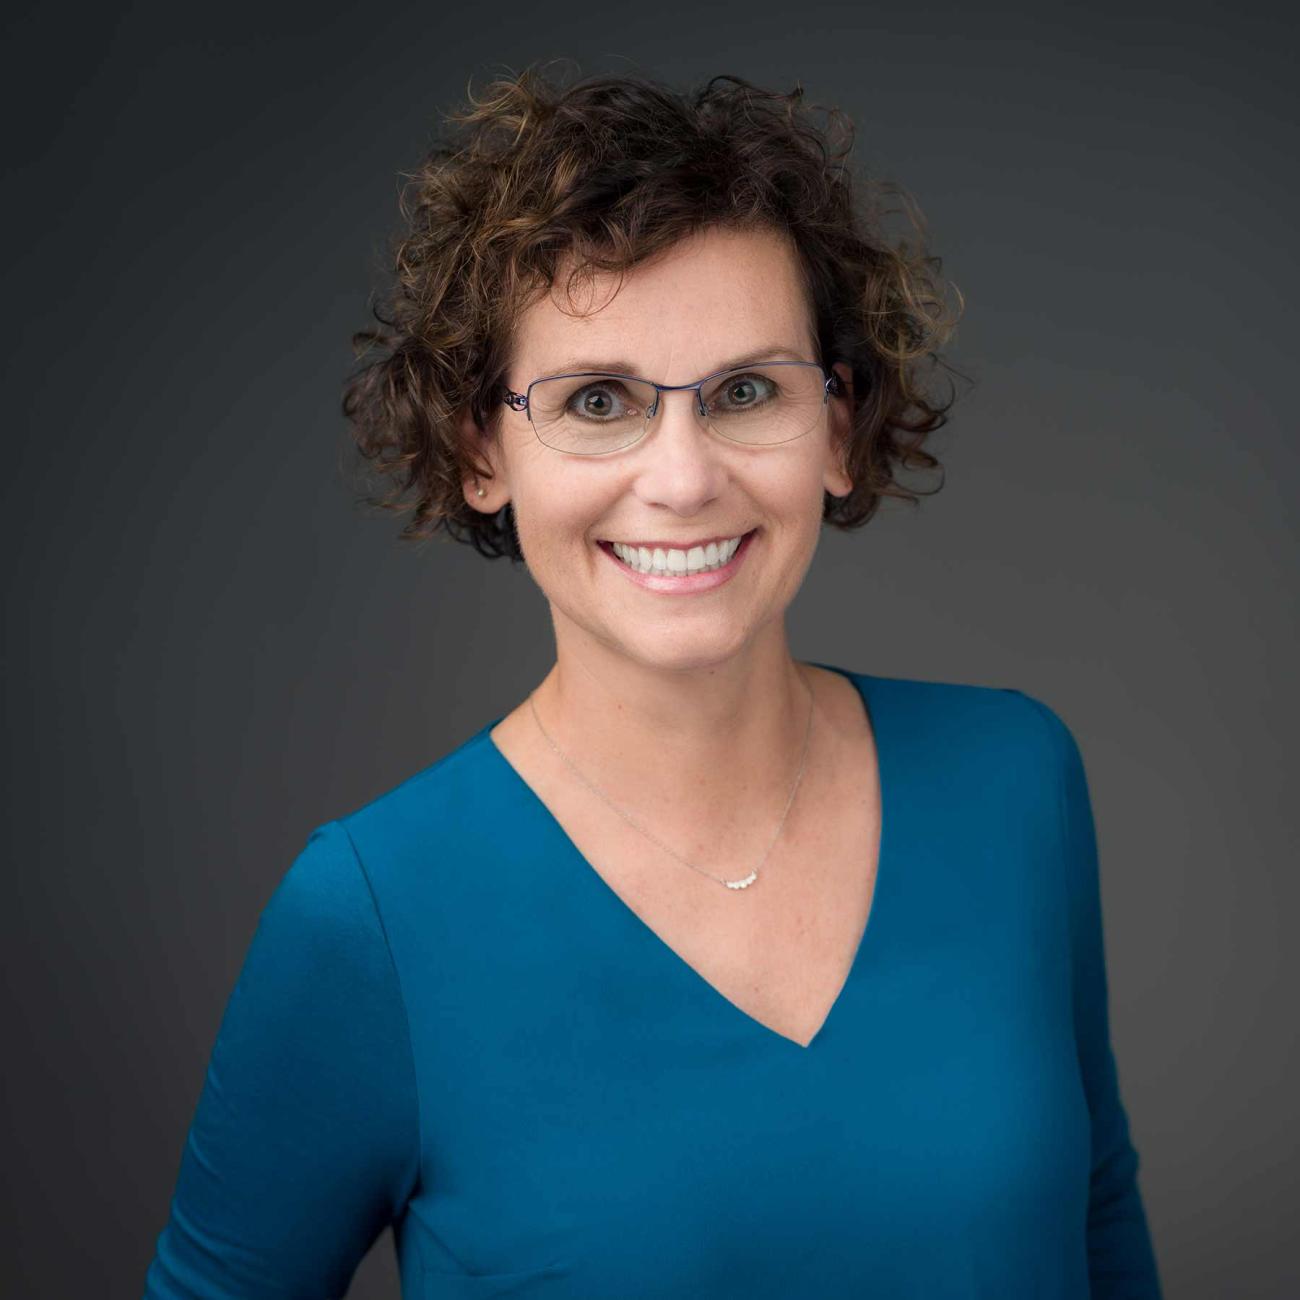 Image of Dr. Brookie Best, PharmD. She is smiling and has short brown curly hair, glasses, and is wearing a blue shirt.